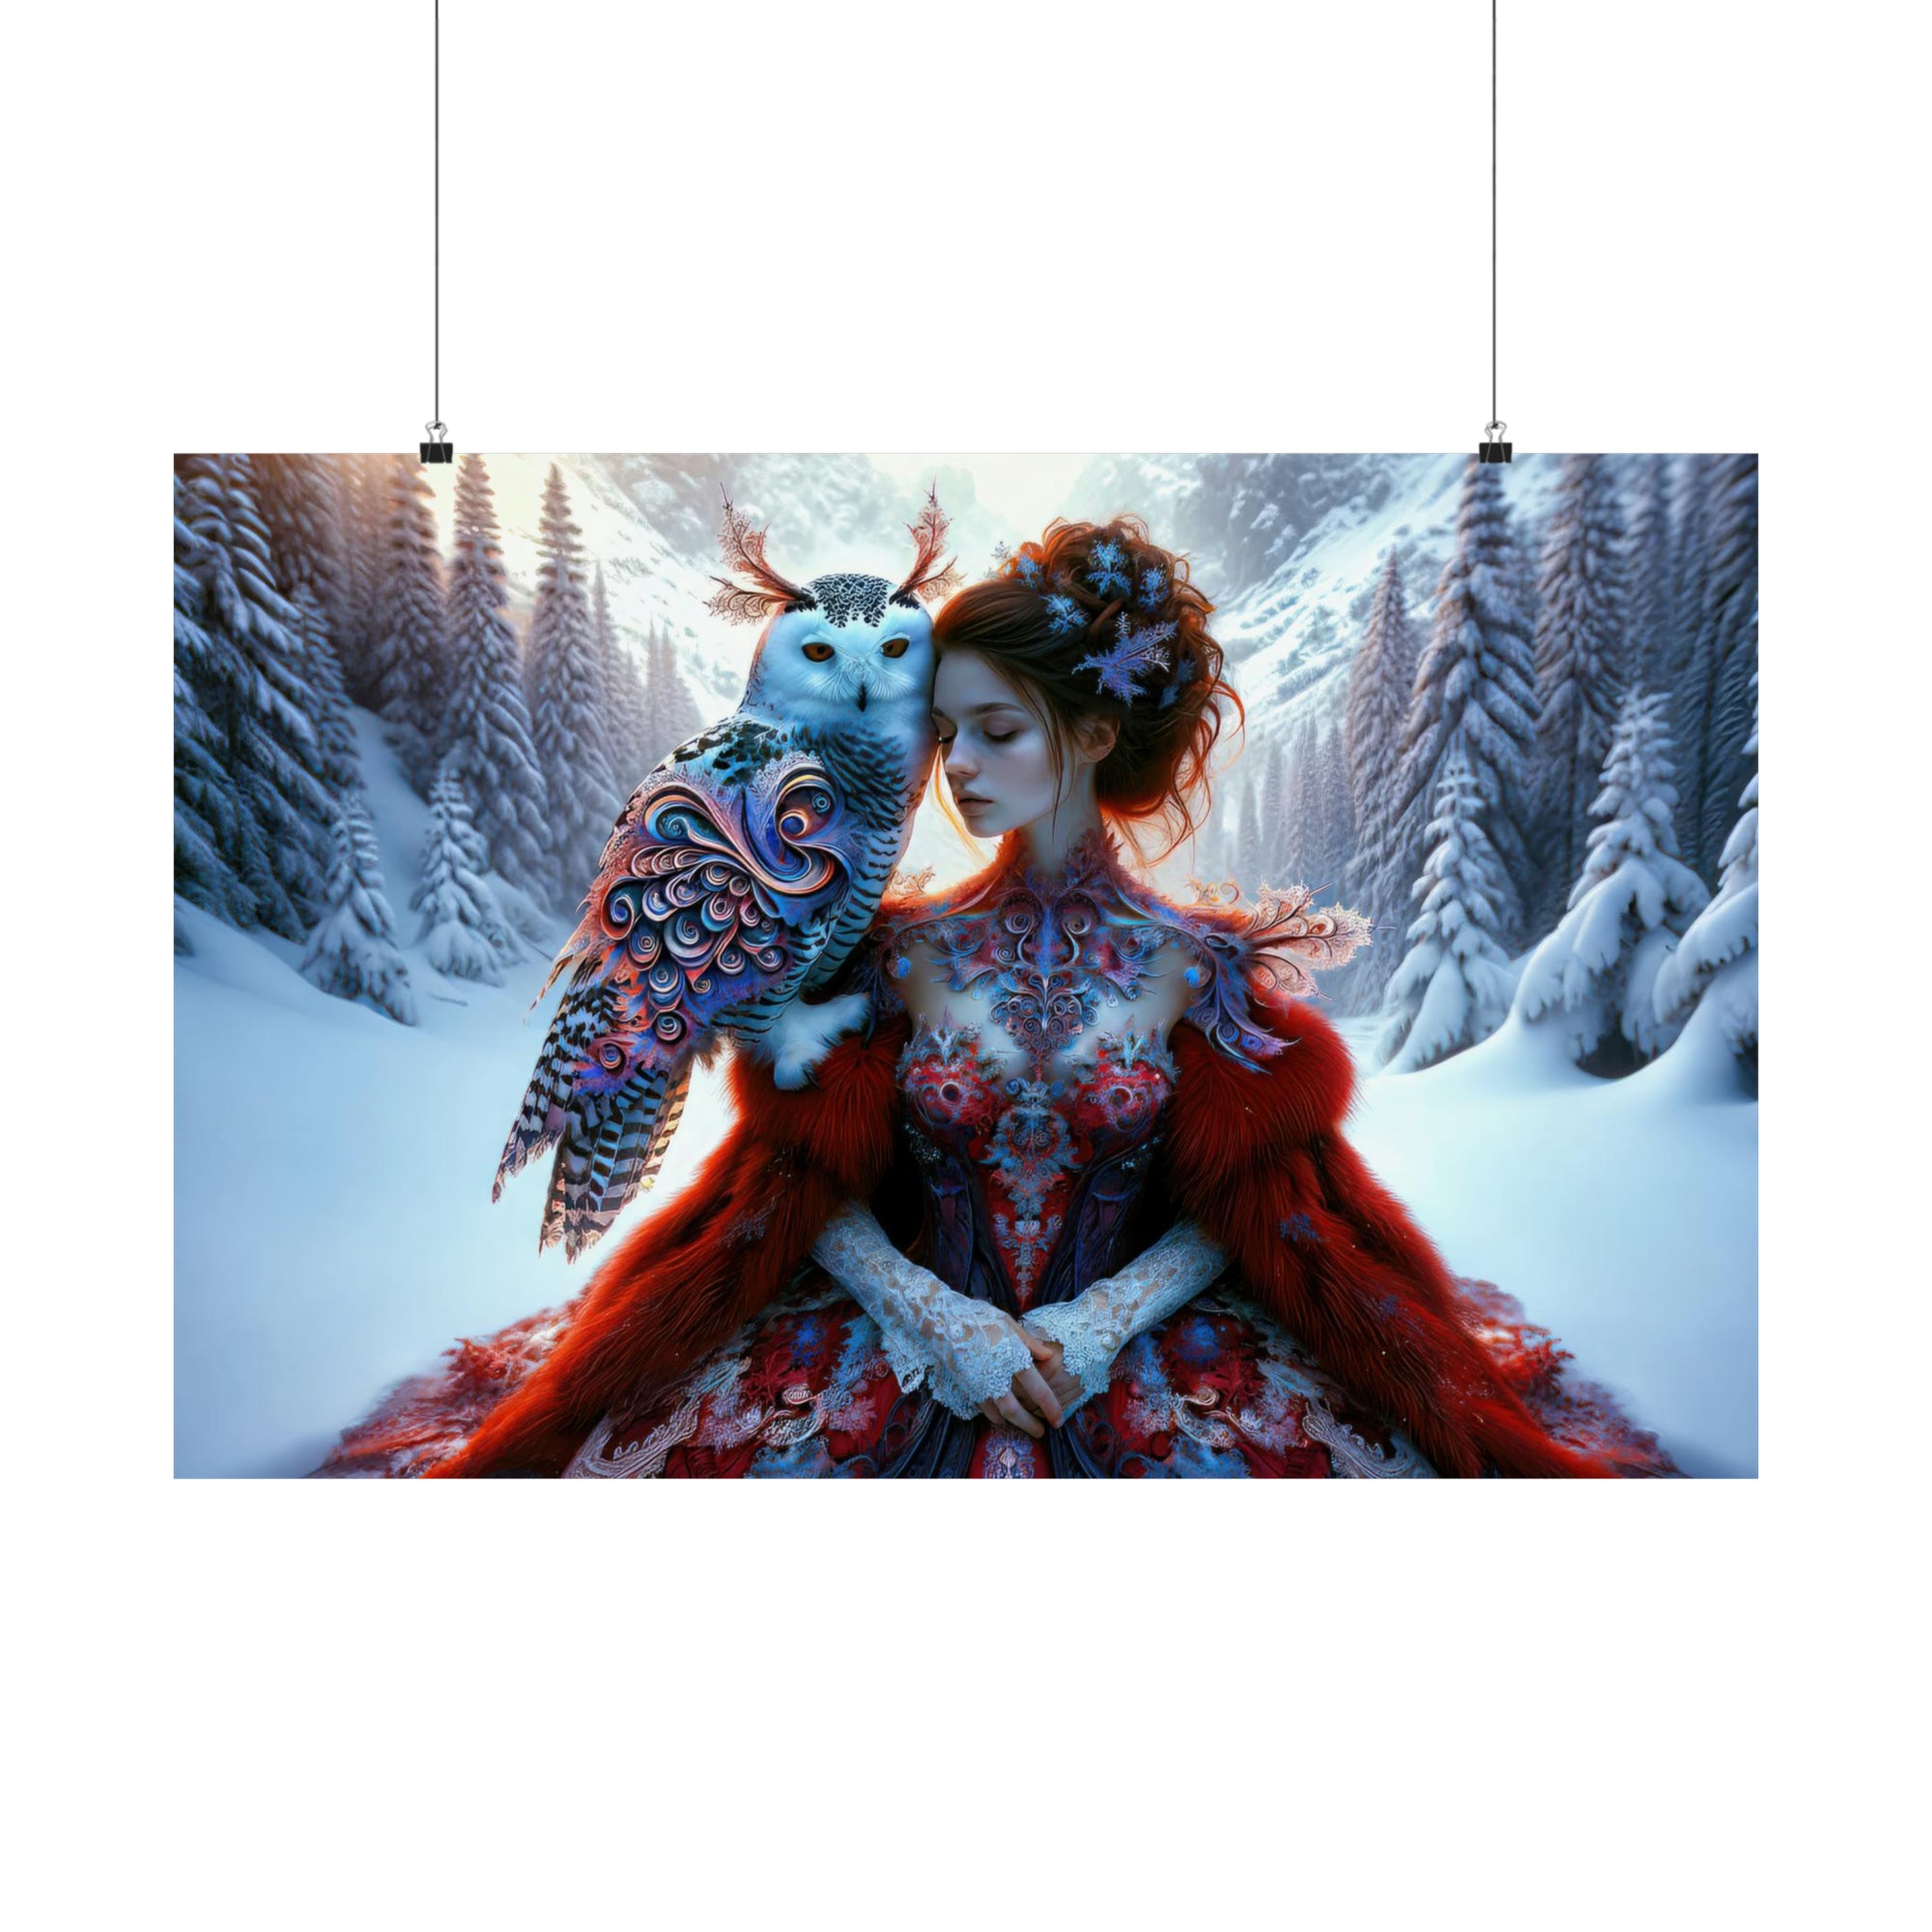 Whispering Wings in the Winter Wilds Poster